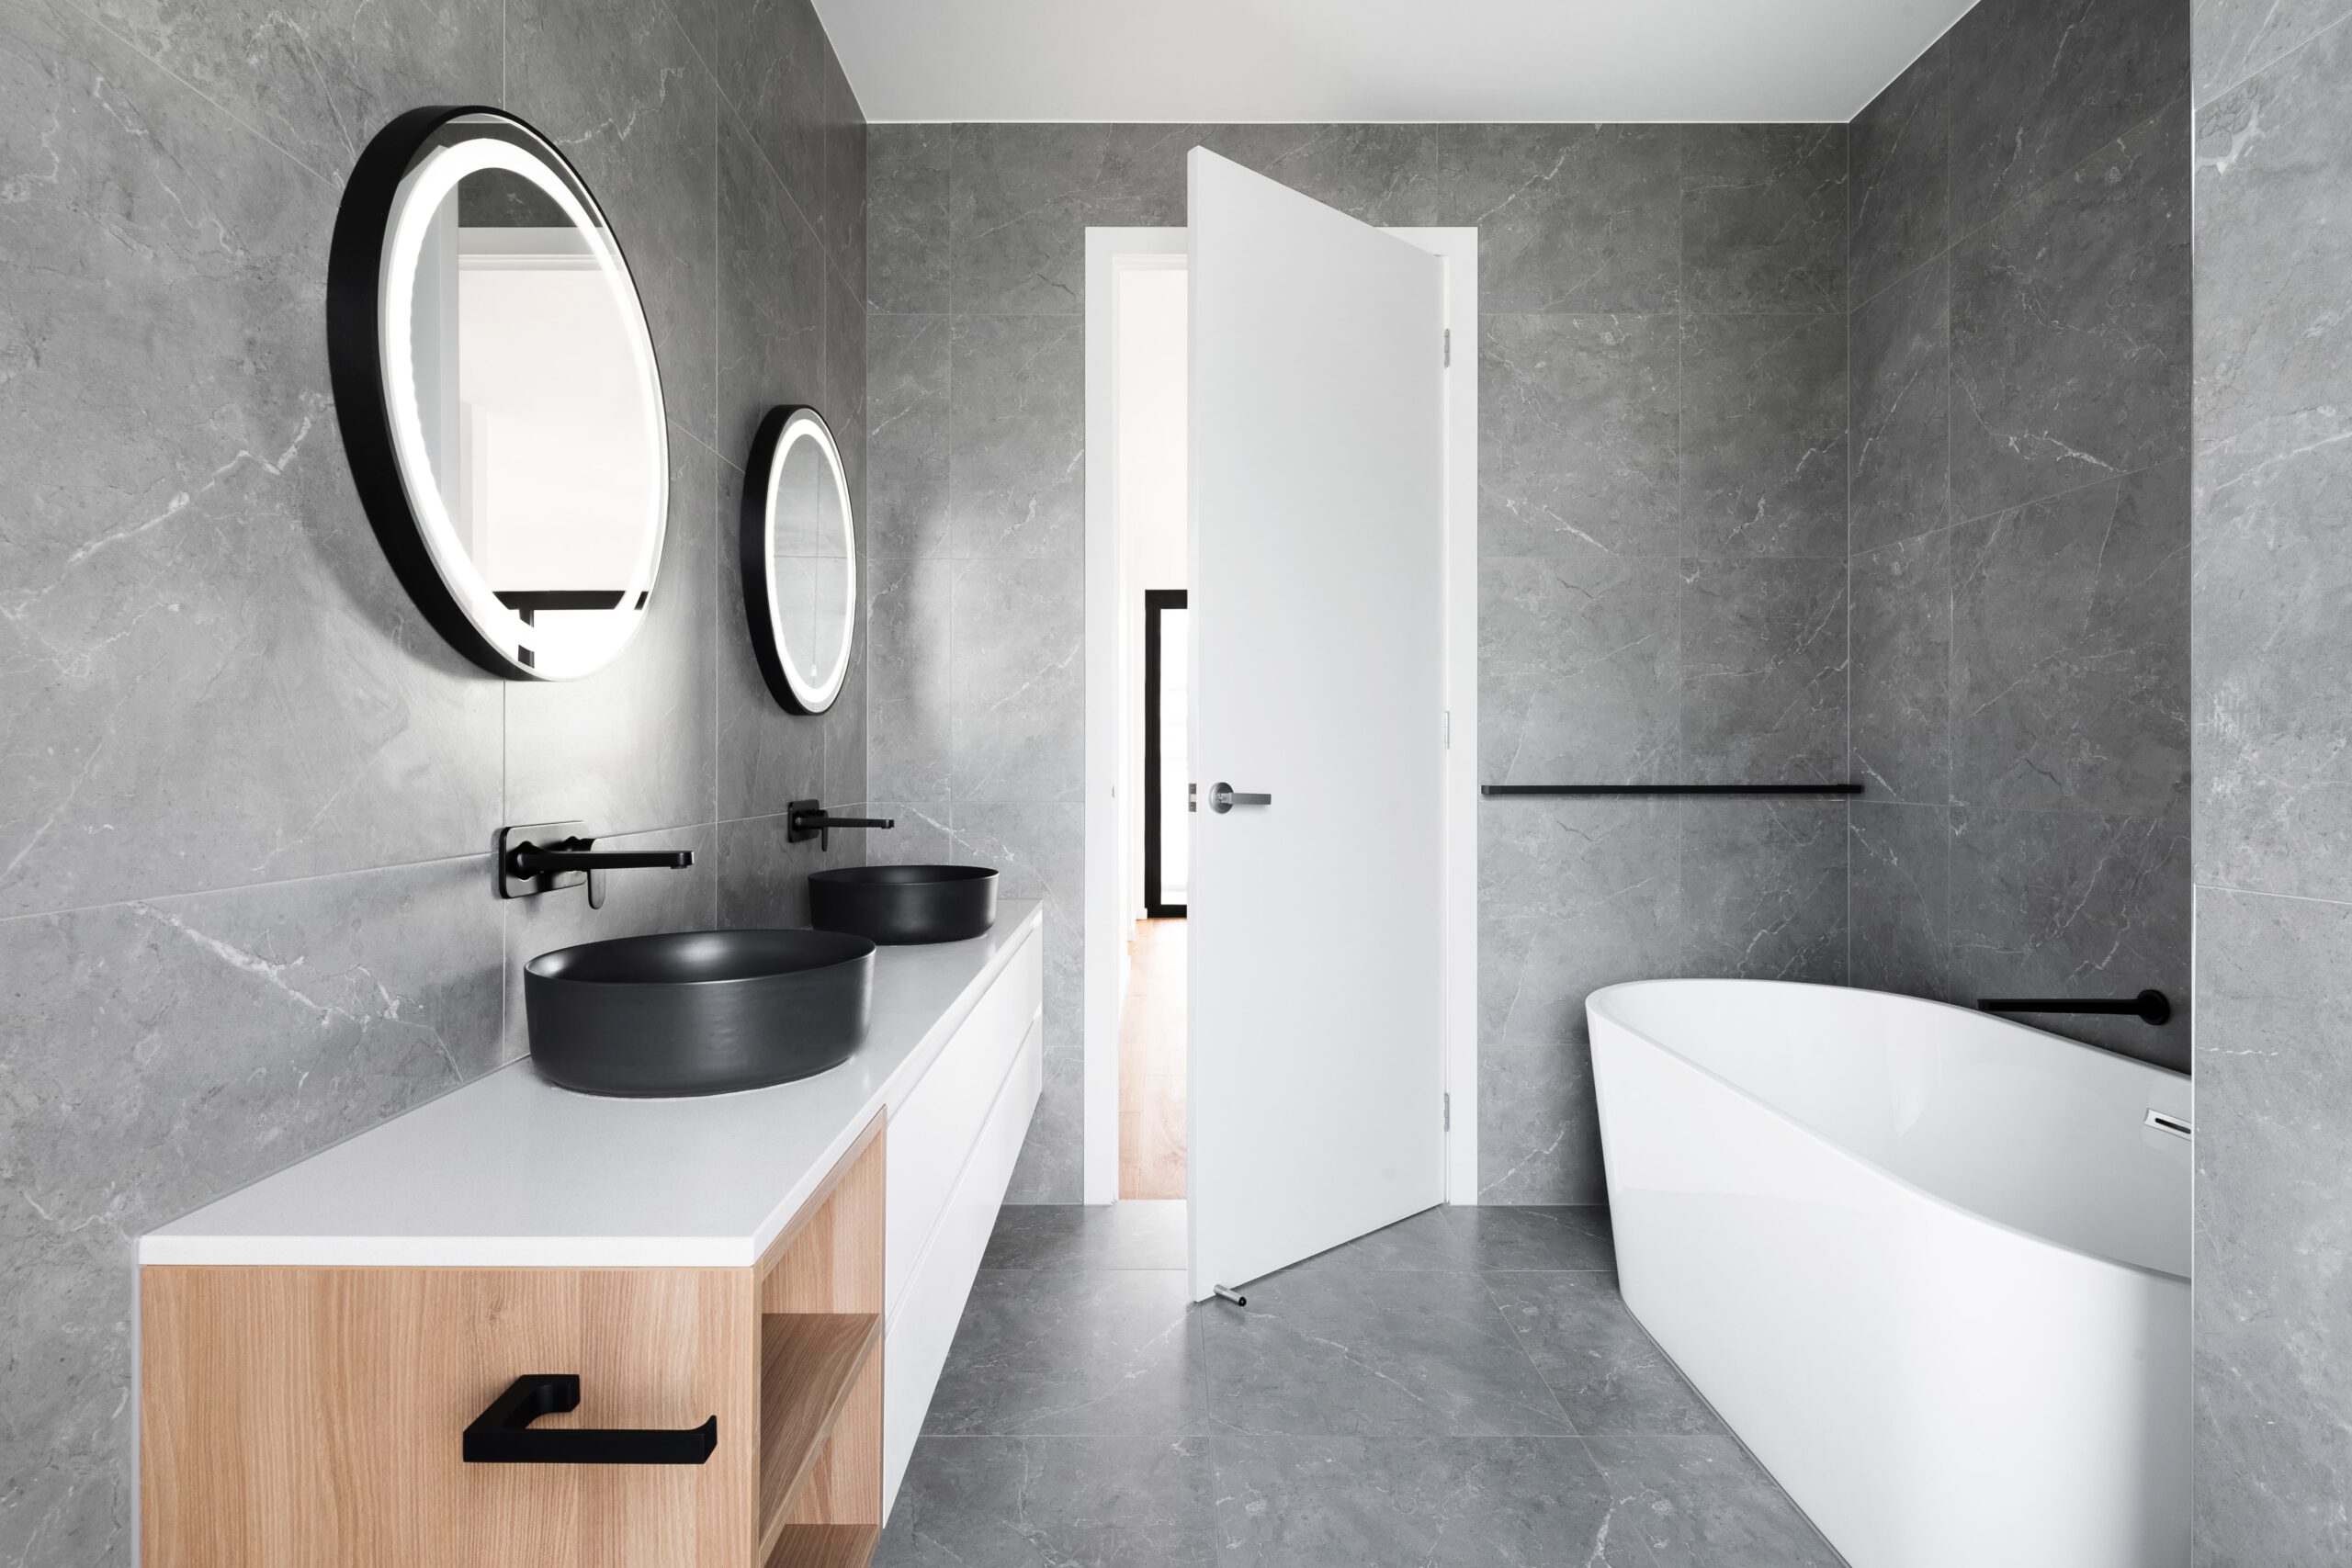 an innovative modern bathroom with grey walls and furniture, in the style of ethereal minimalism, rounded forms, simplicity, monochromatic color palettes, anti-clutter, minimalist designs, light gray and black, expansive spaces, marbleized